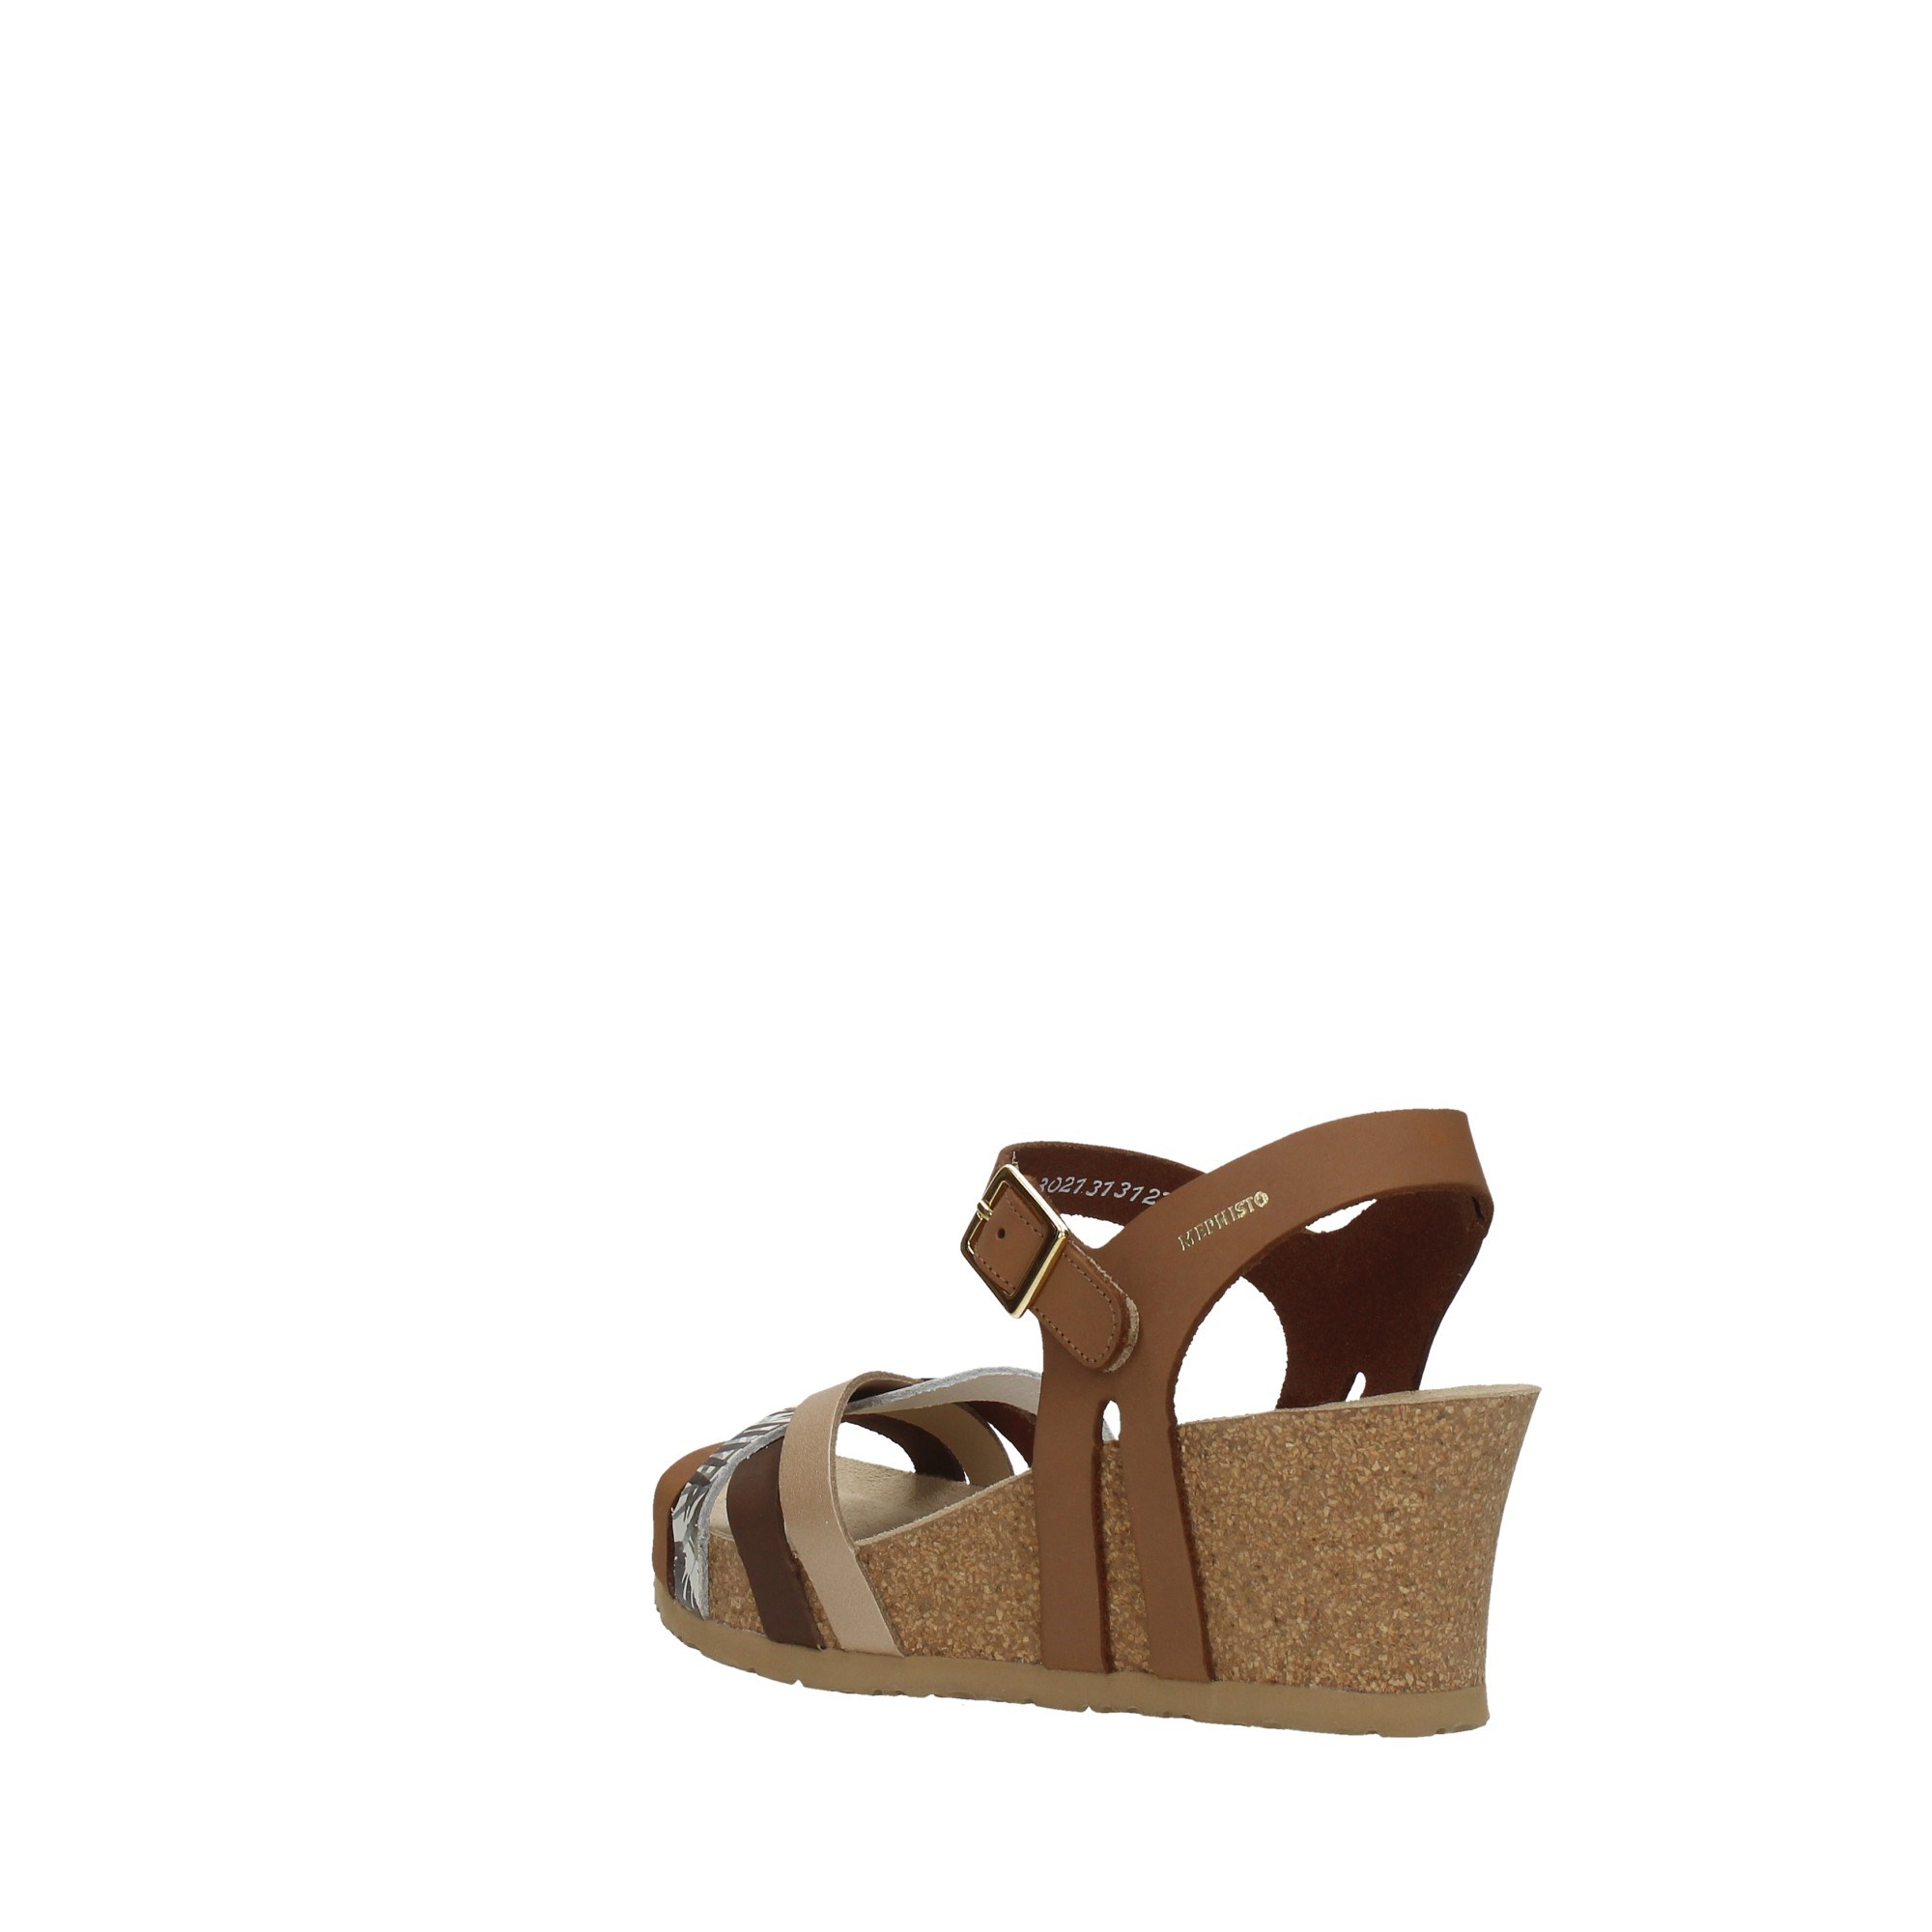 Mephisto Shoes Women Wedge Sandals Leather LANNY